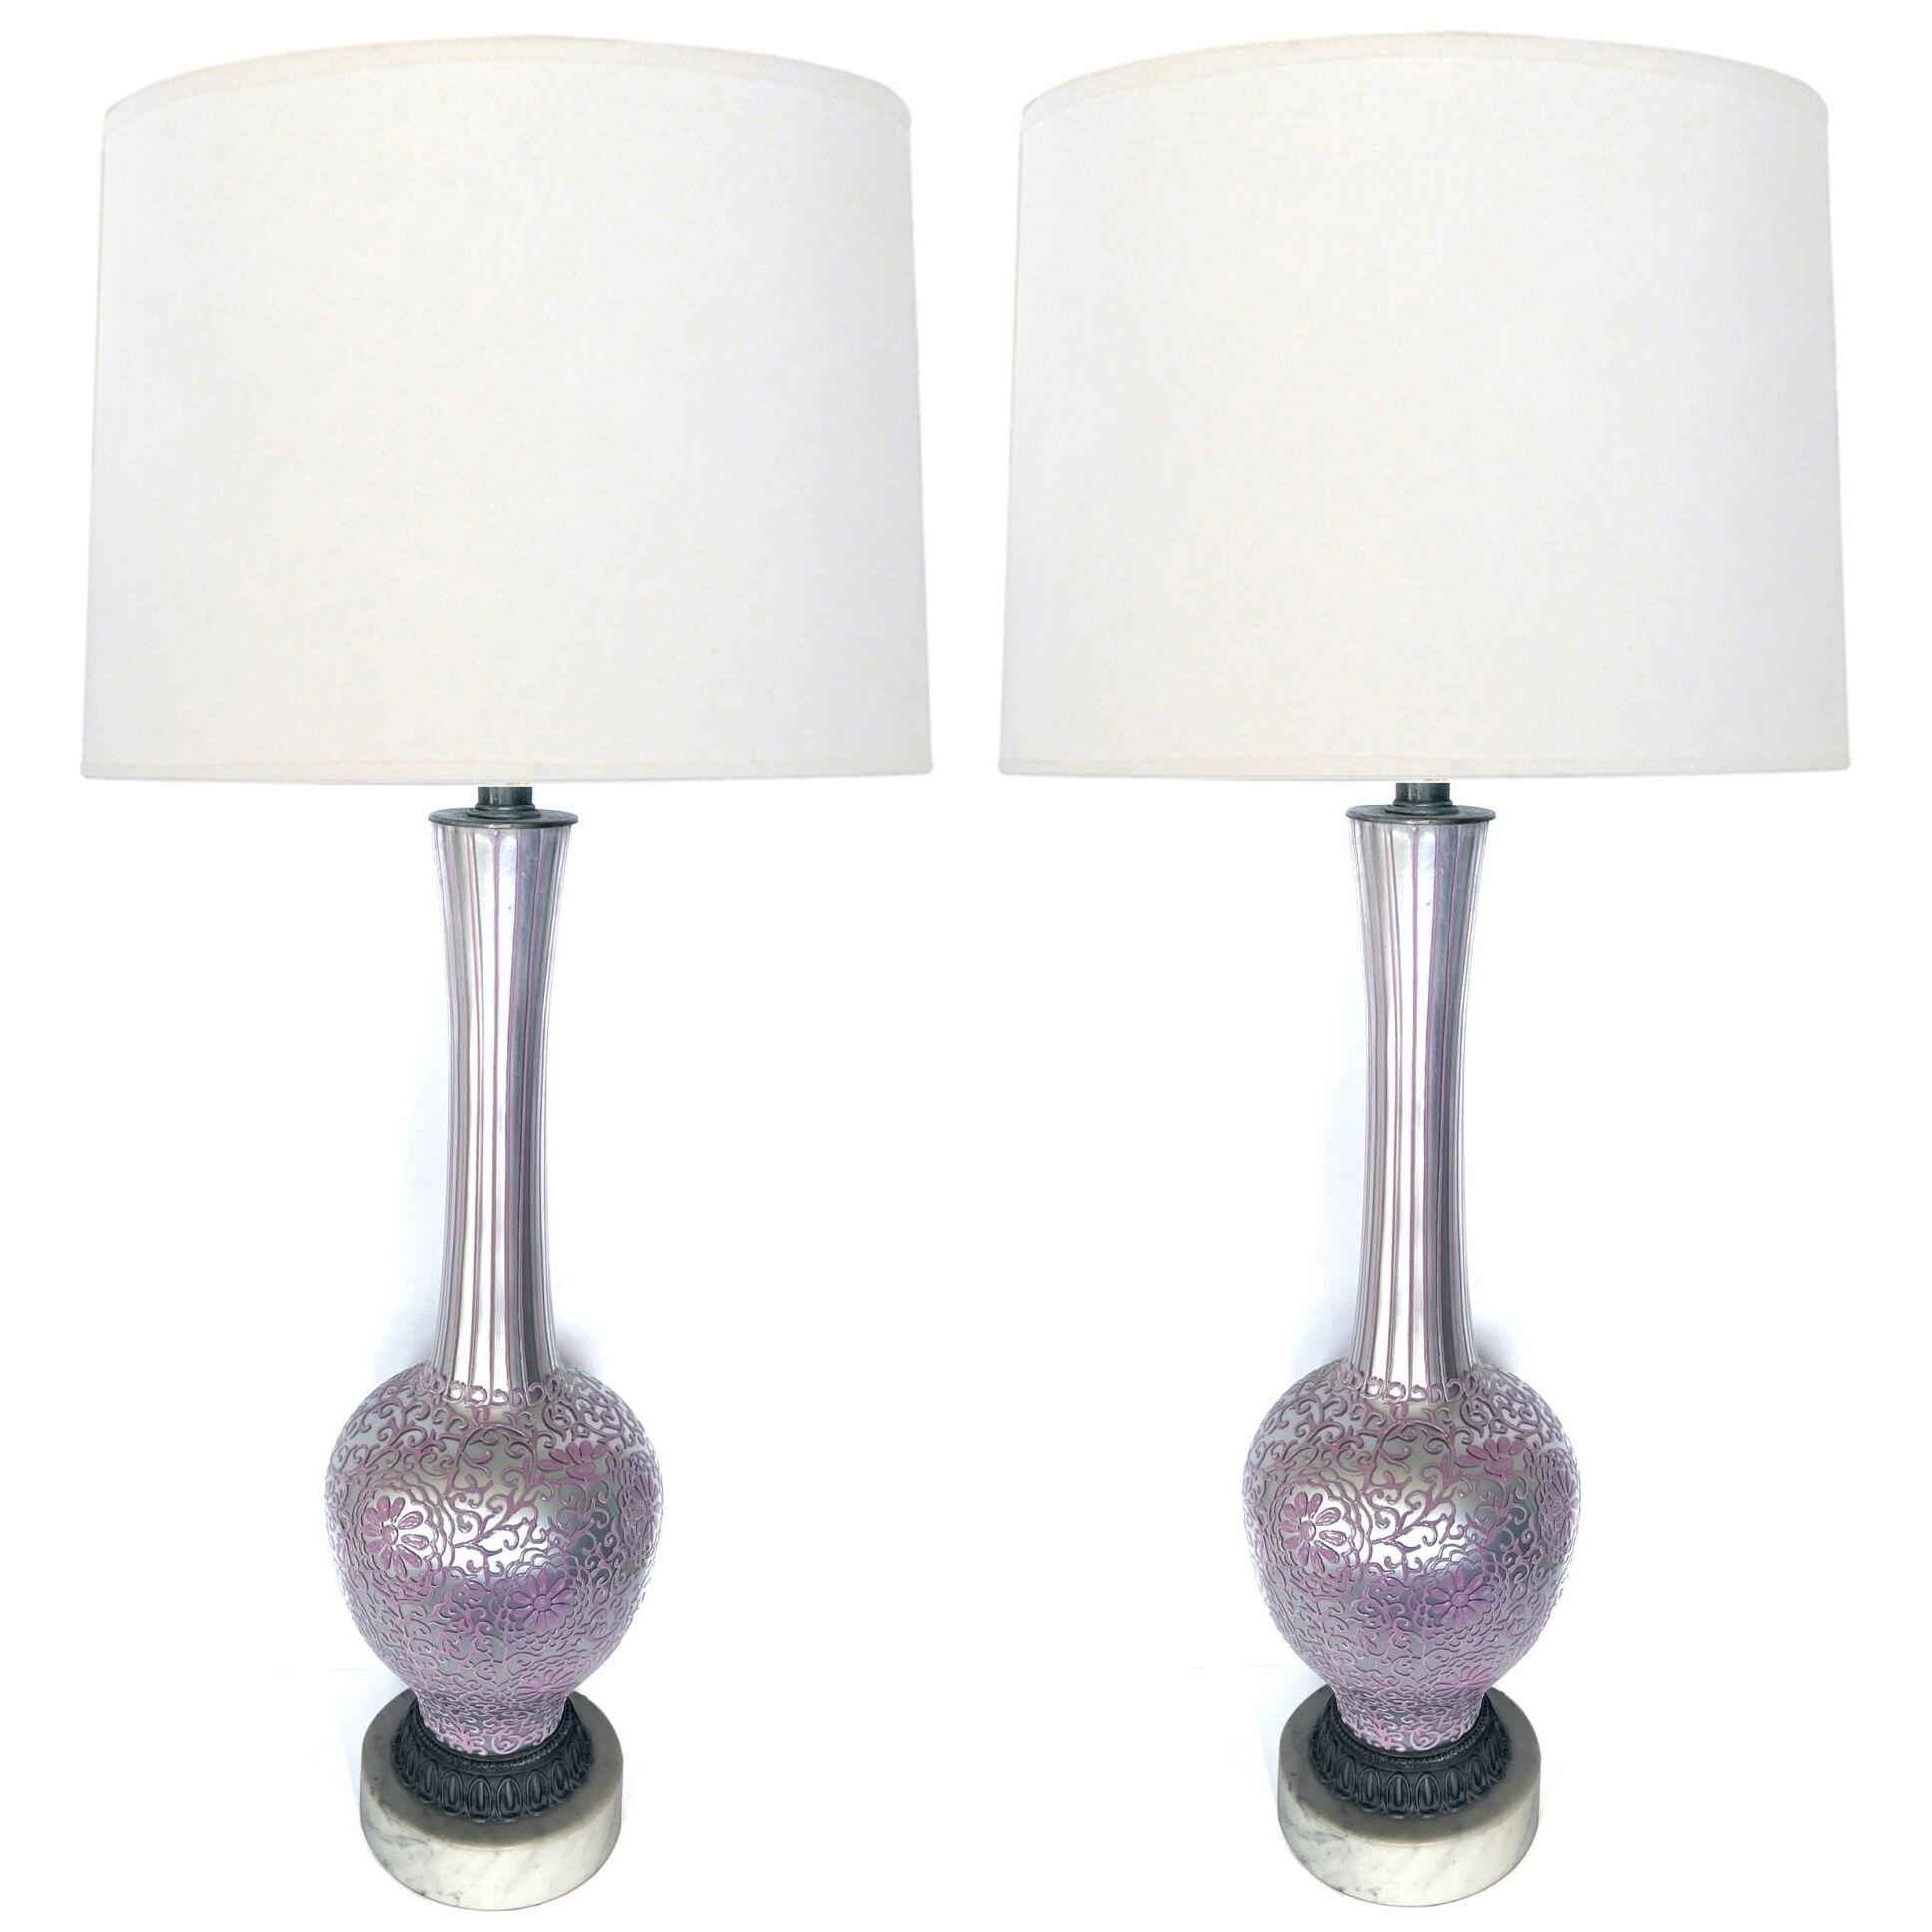 Tall pair of 1960's reverse-silvered lamps with applied floral vine decoration